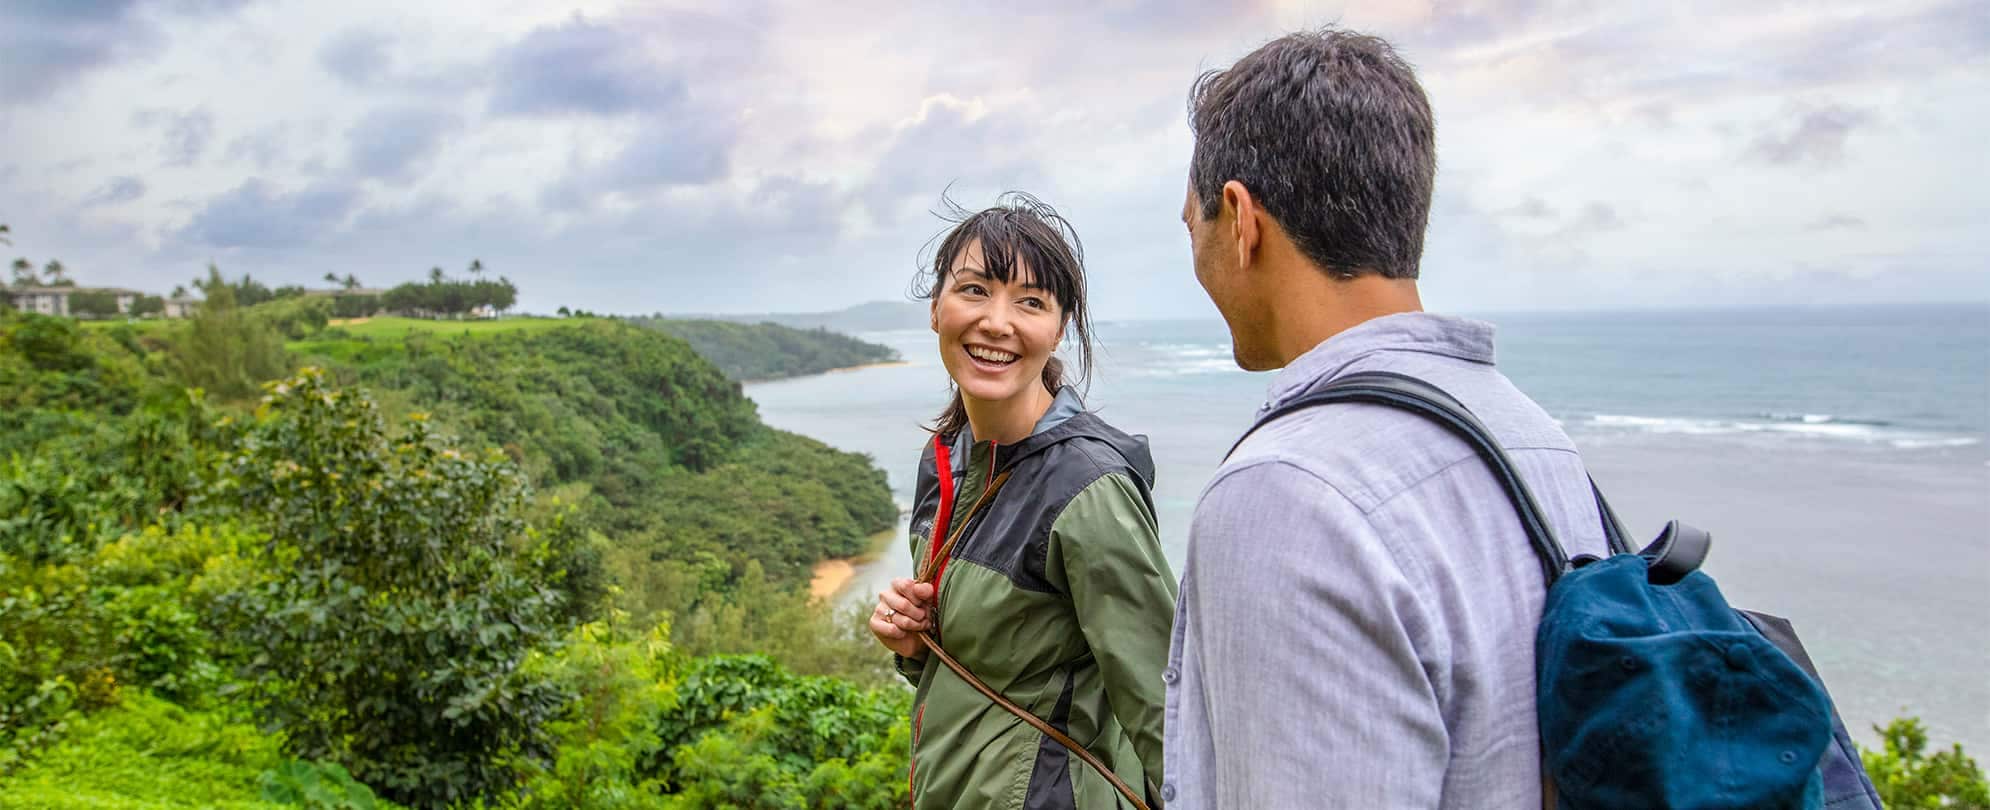 A woman turns around smiling at a man as they hike along a lush ridge with the ocean in the distance.